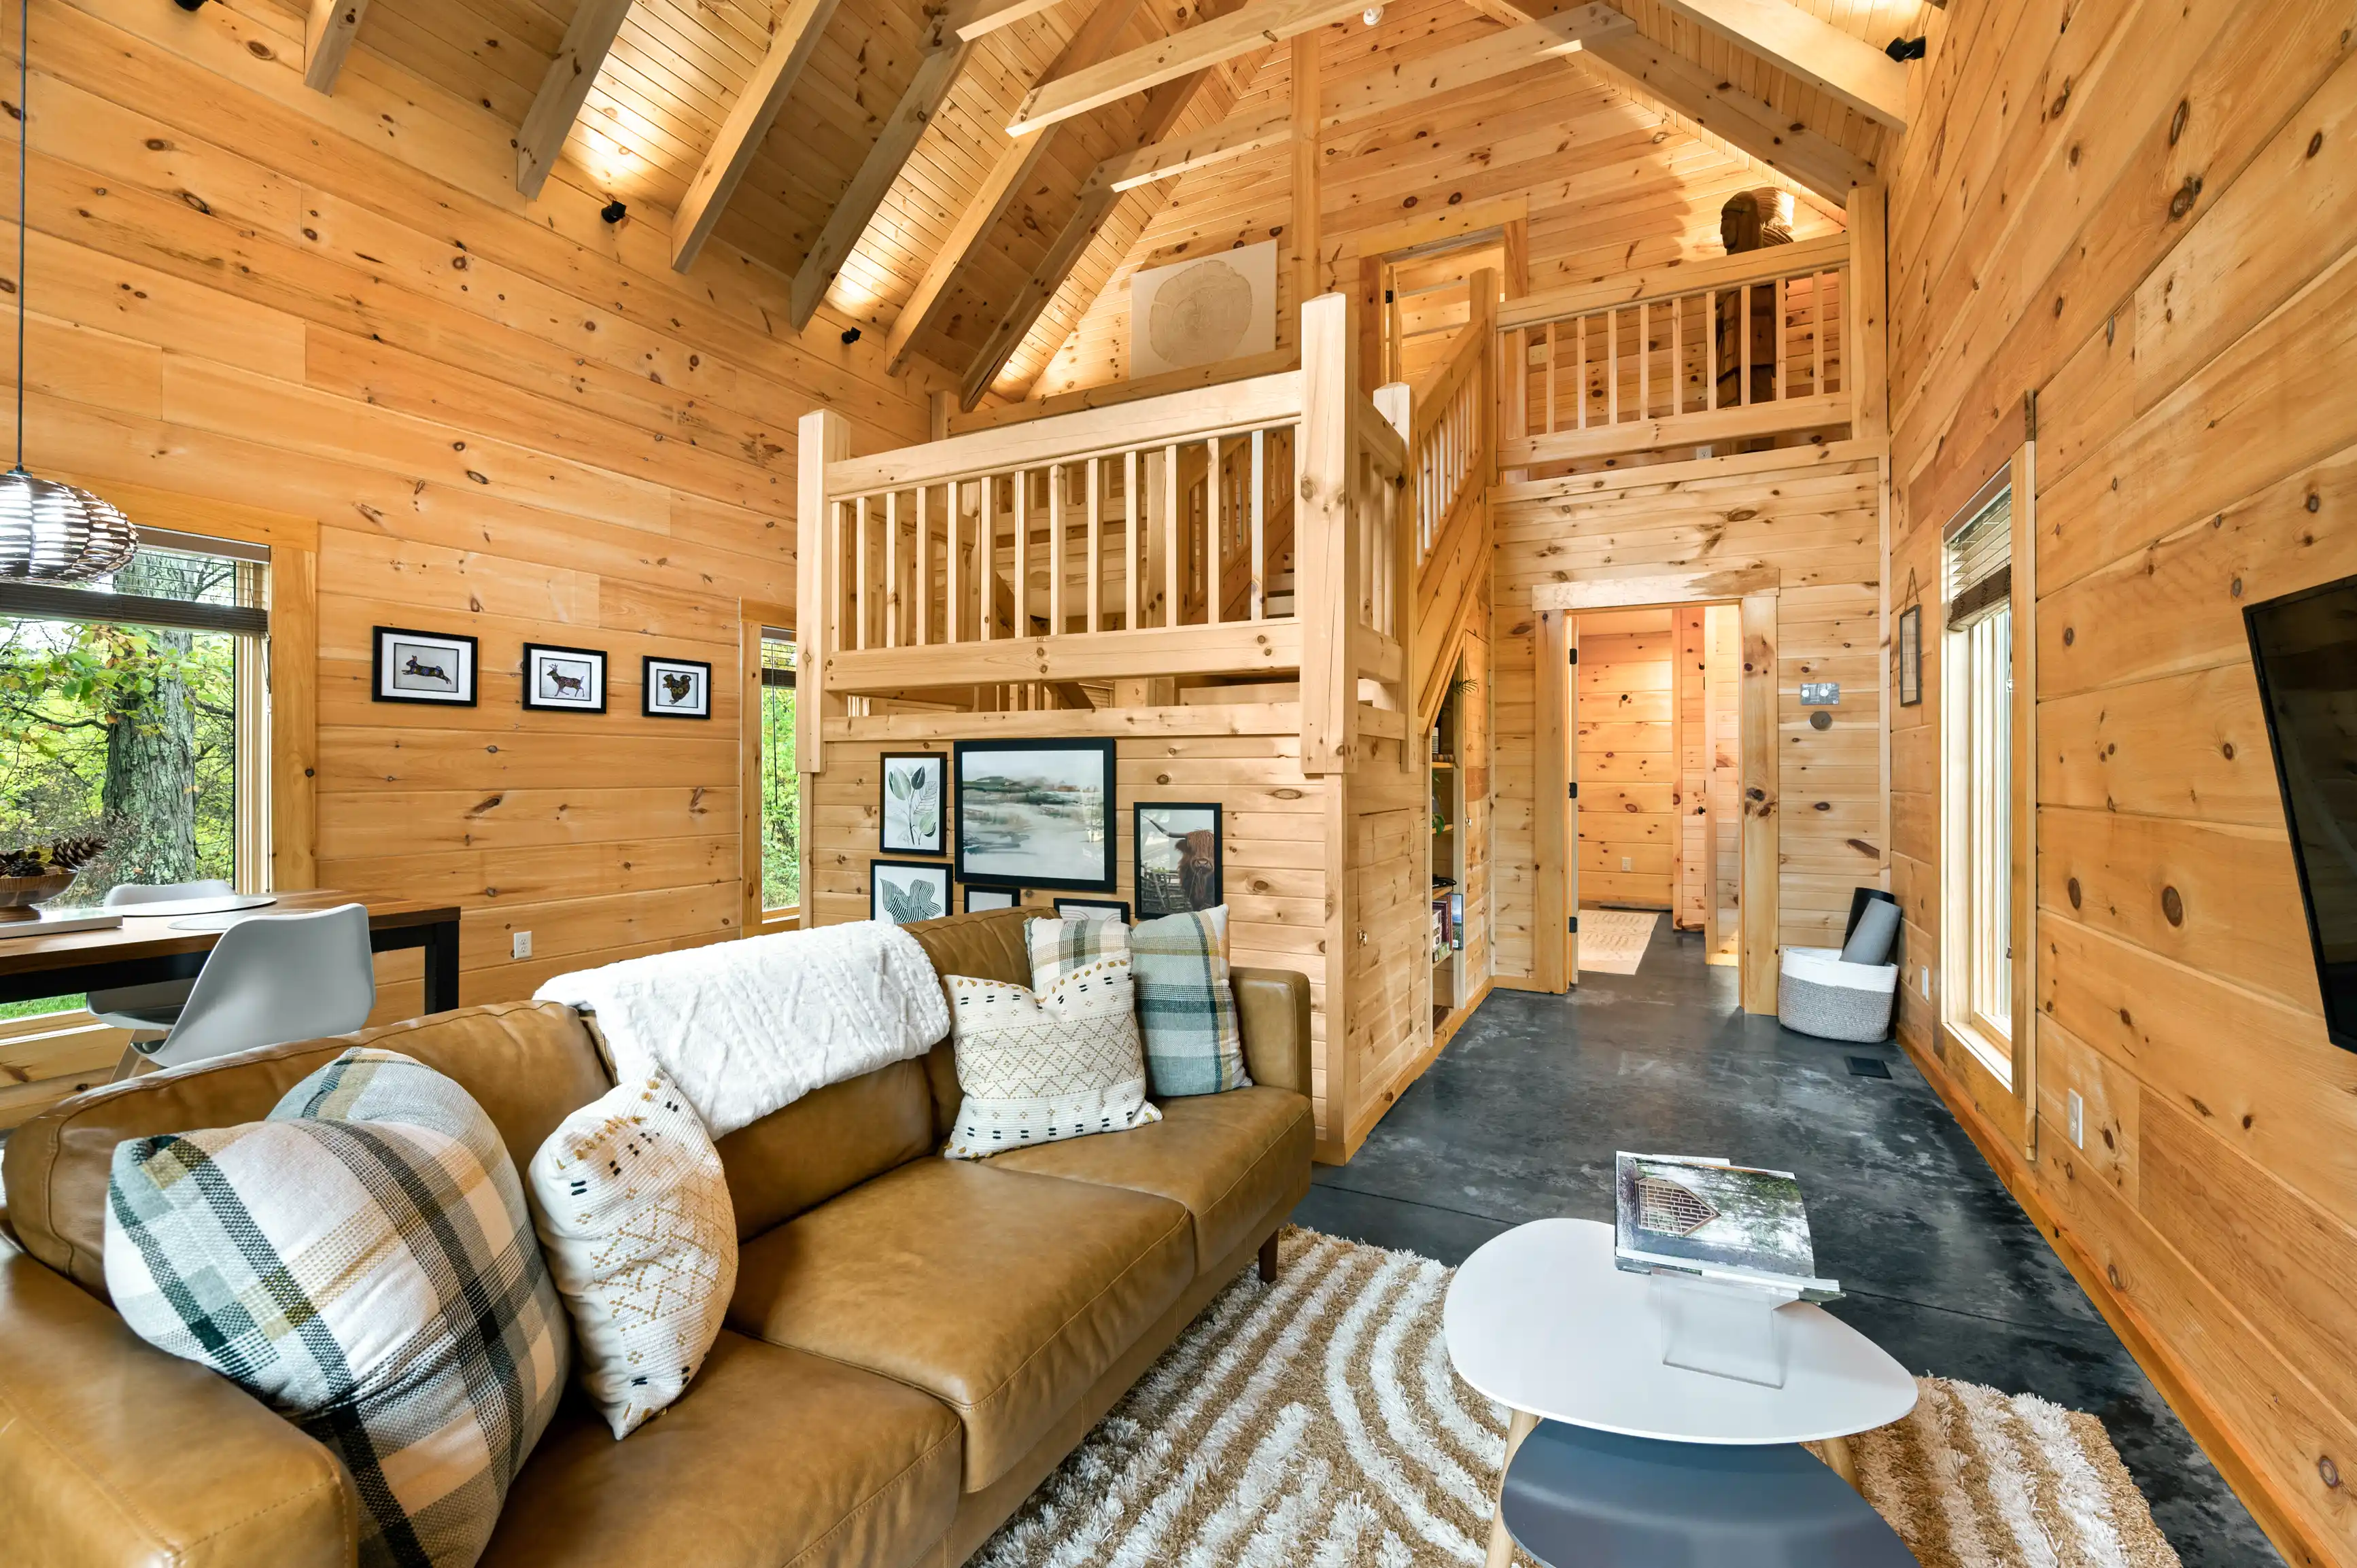 Interior of a cozy cabin living room with wooden walls, a high ceiling, loft area, large windows, plush sofa with pillows, and modern decorations.